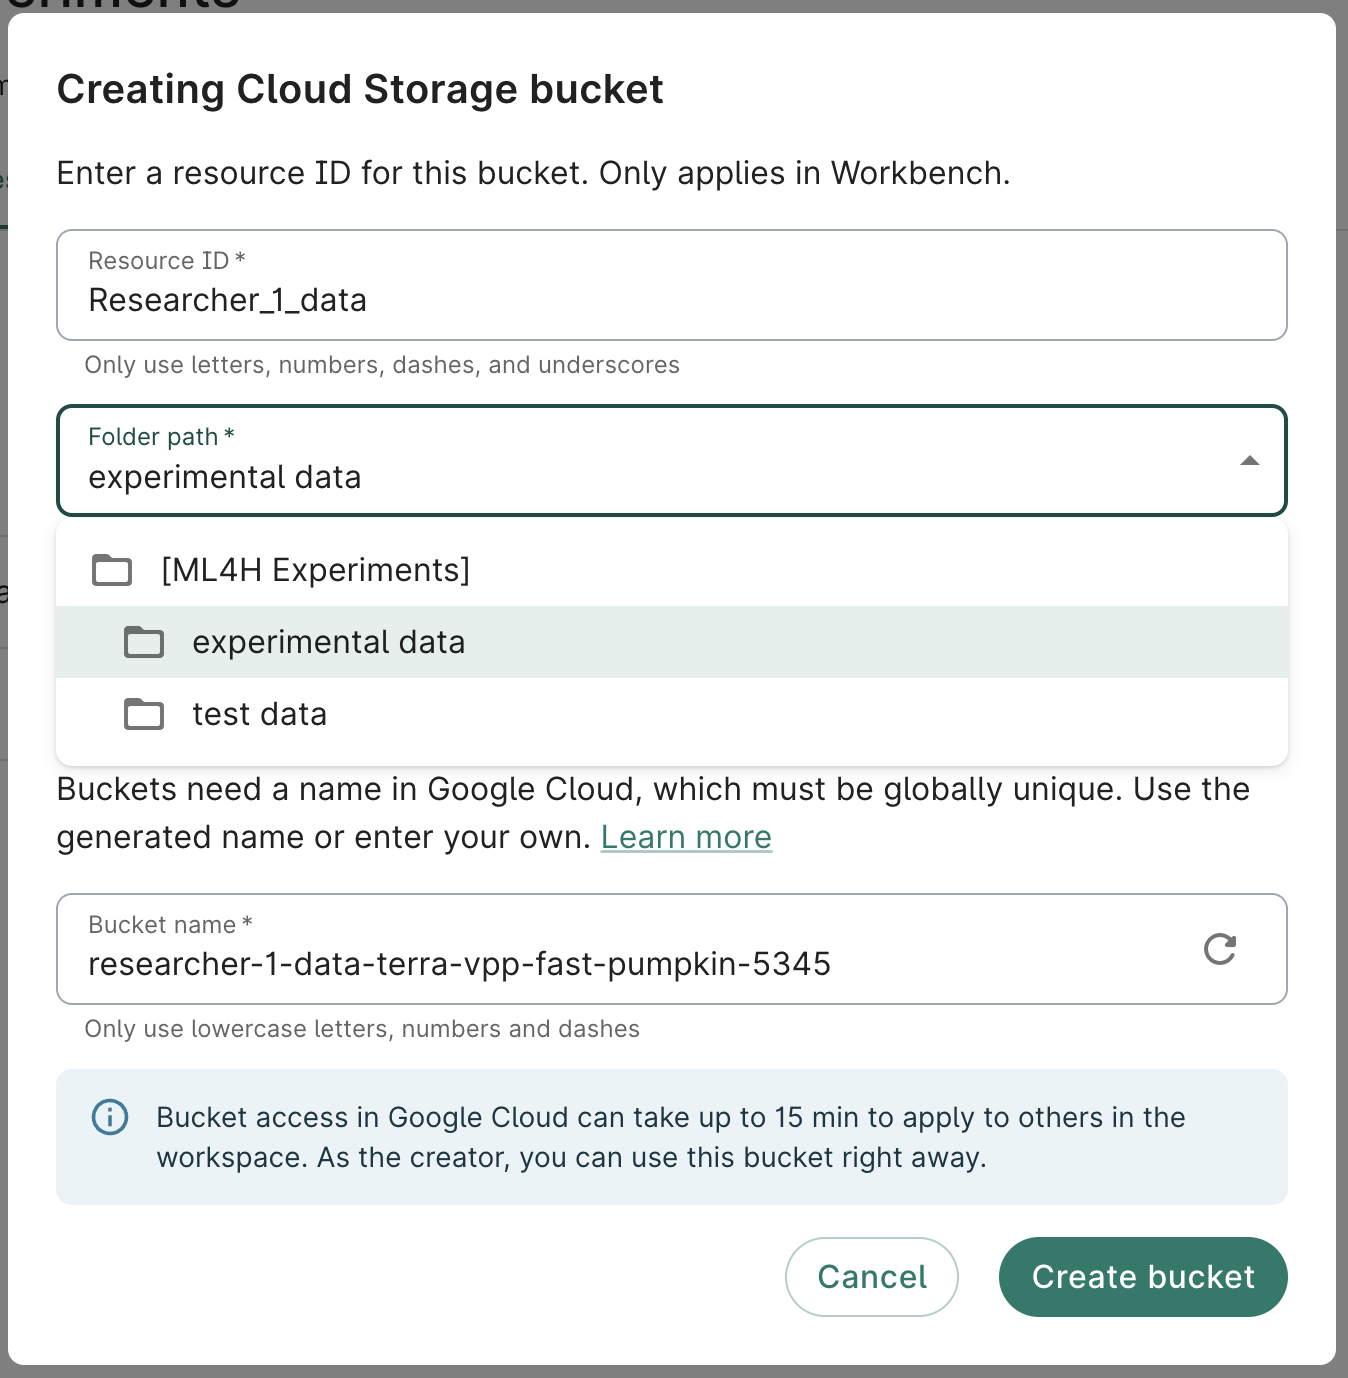 Screenshot of the Creating Cloud Storage bucket dialog, showing the folder path for the newly created bucket.